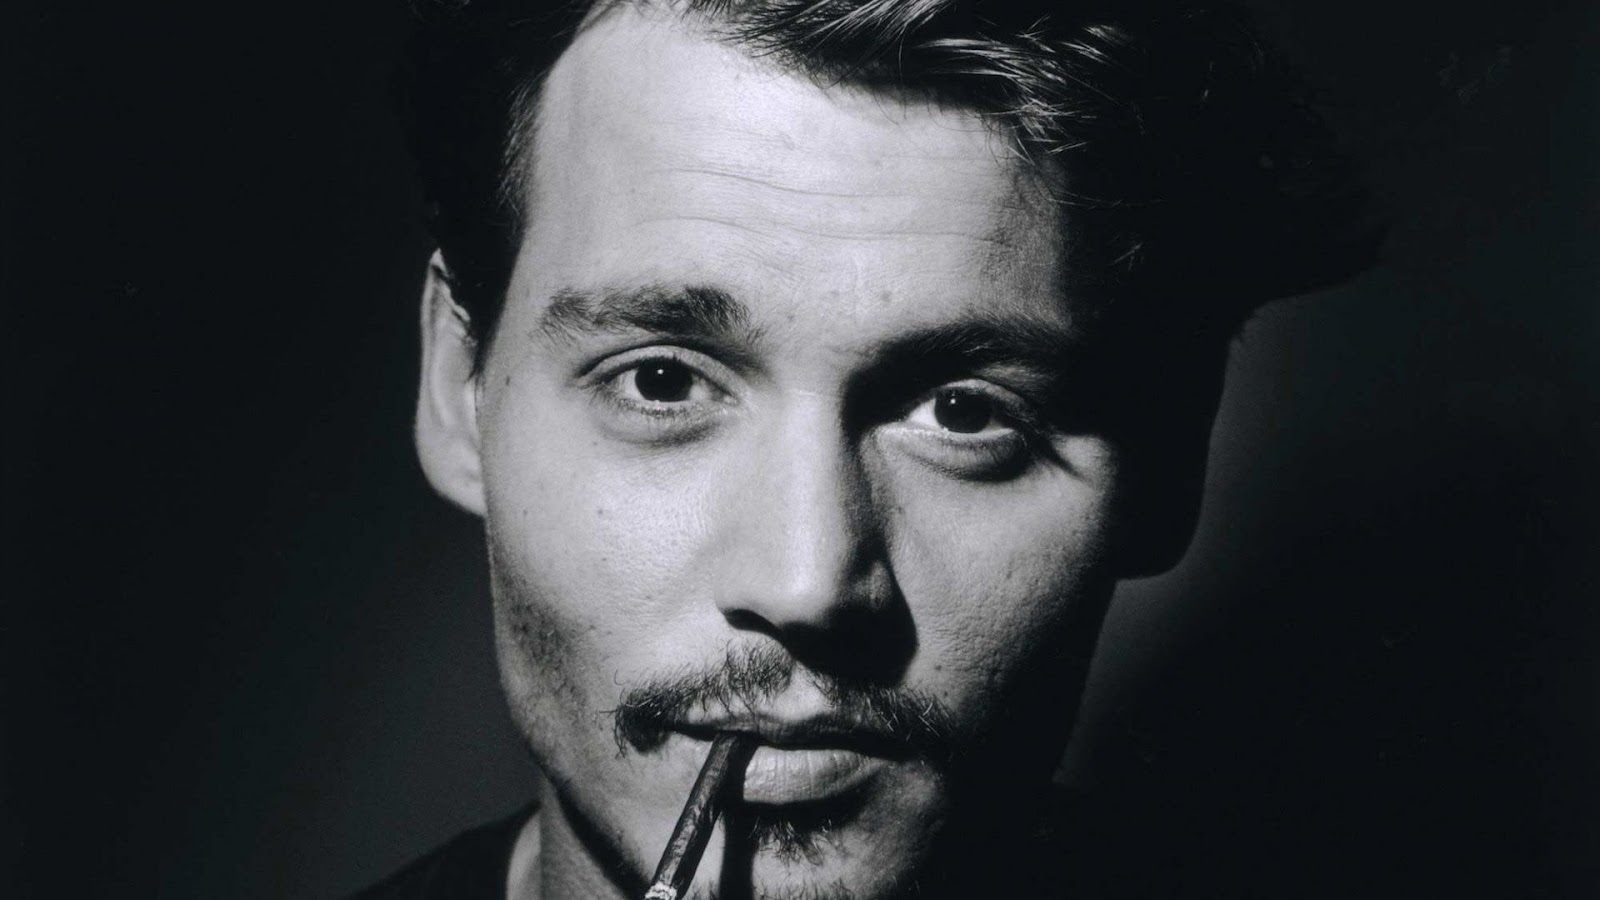 Personal brand 1: who is Johnny Depp?